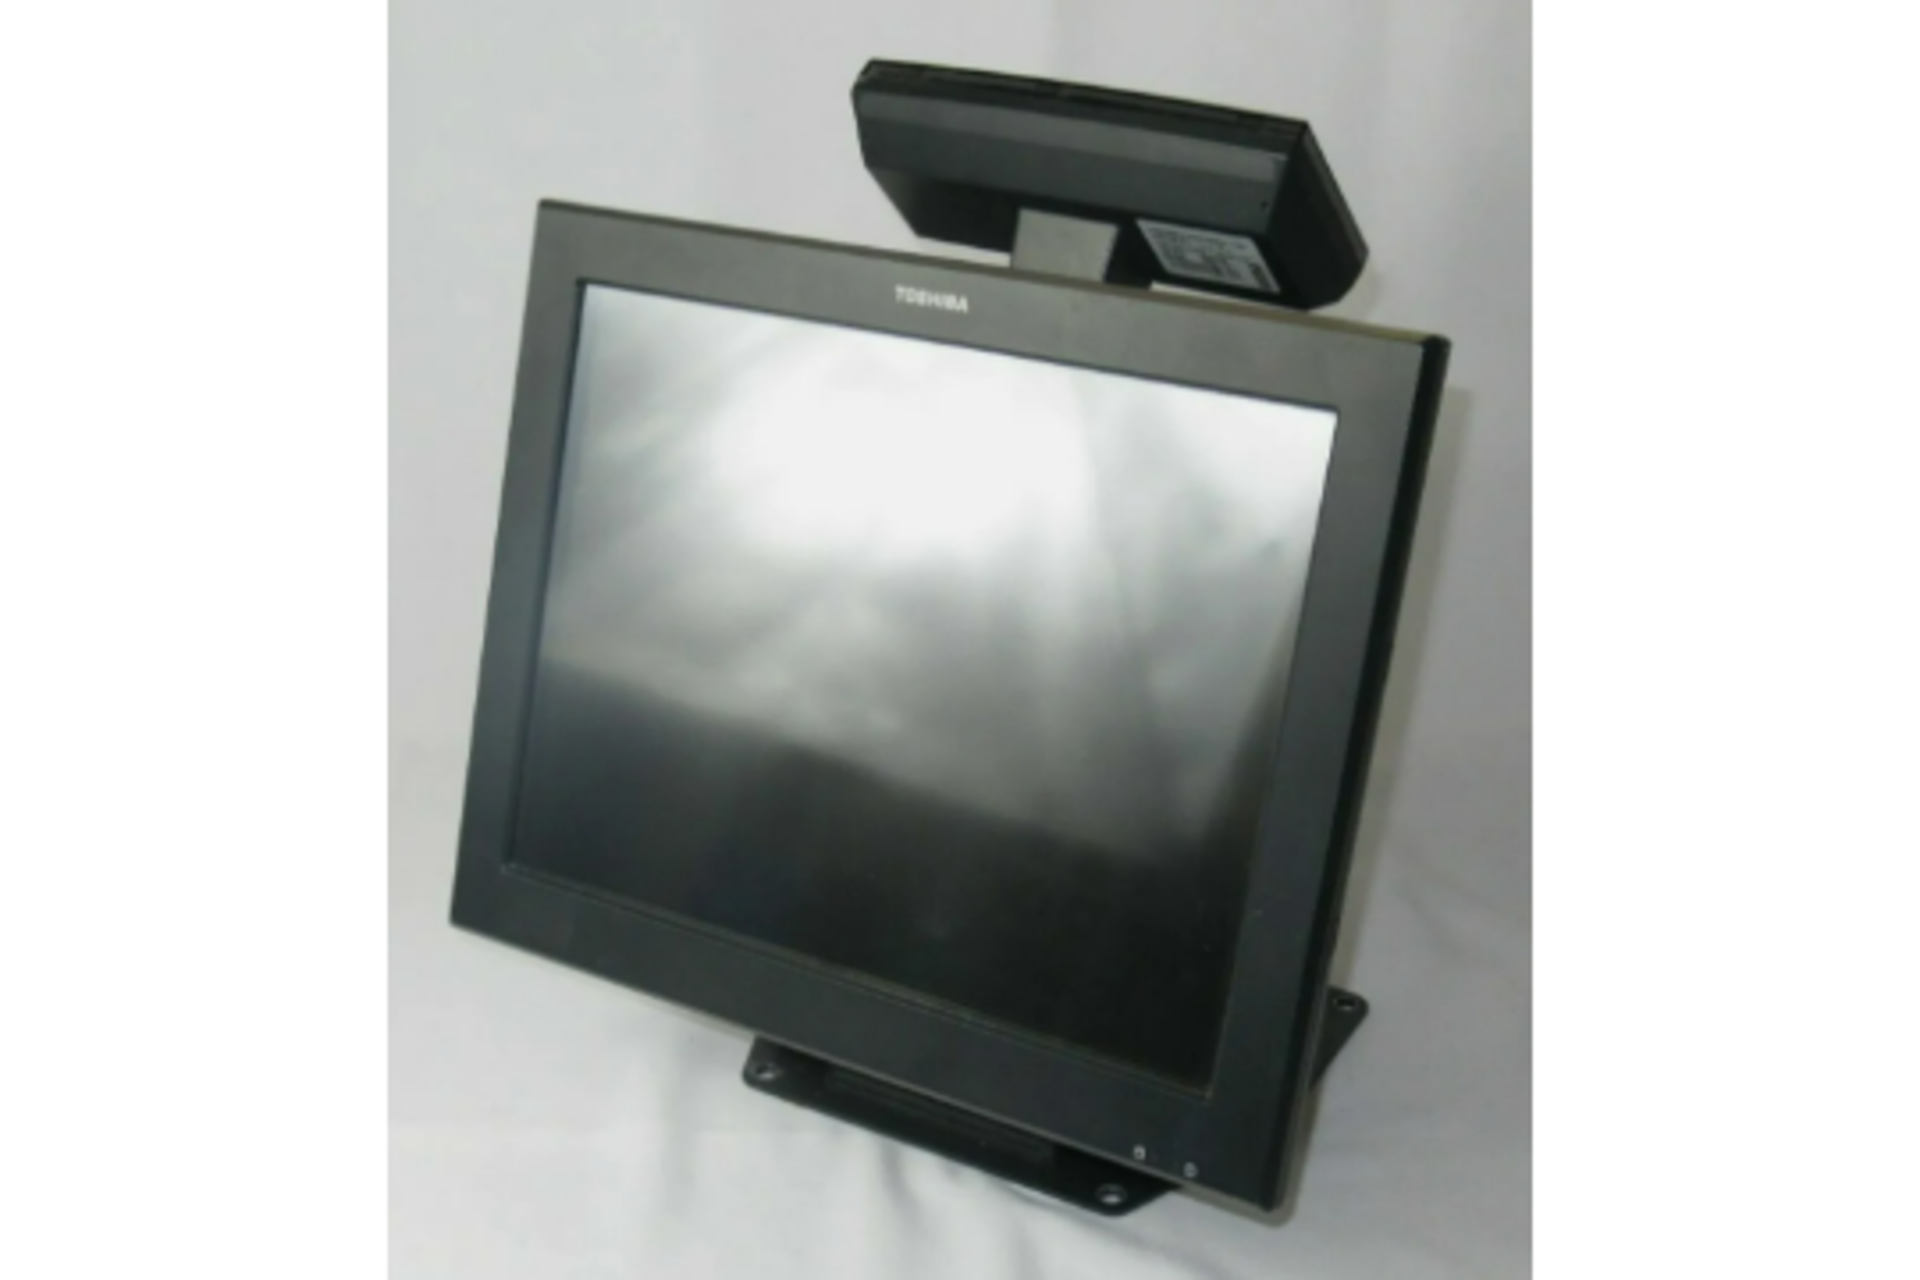 PALLET TO CONTAIN 36 x Toshiba ST A10 15" EPOS Systems. Cost New £1435 each, total pallet RRP £51, - Image 6 of 6